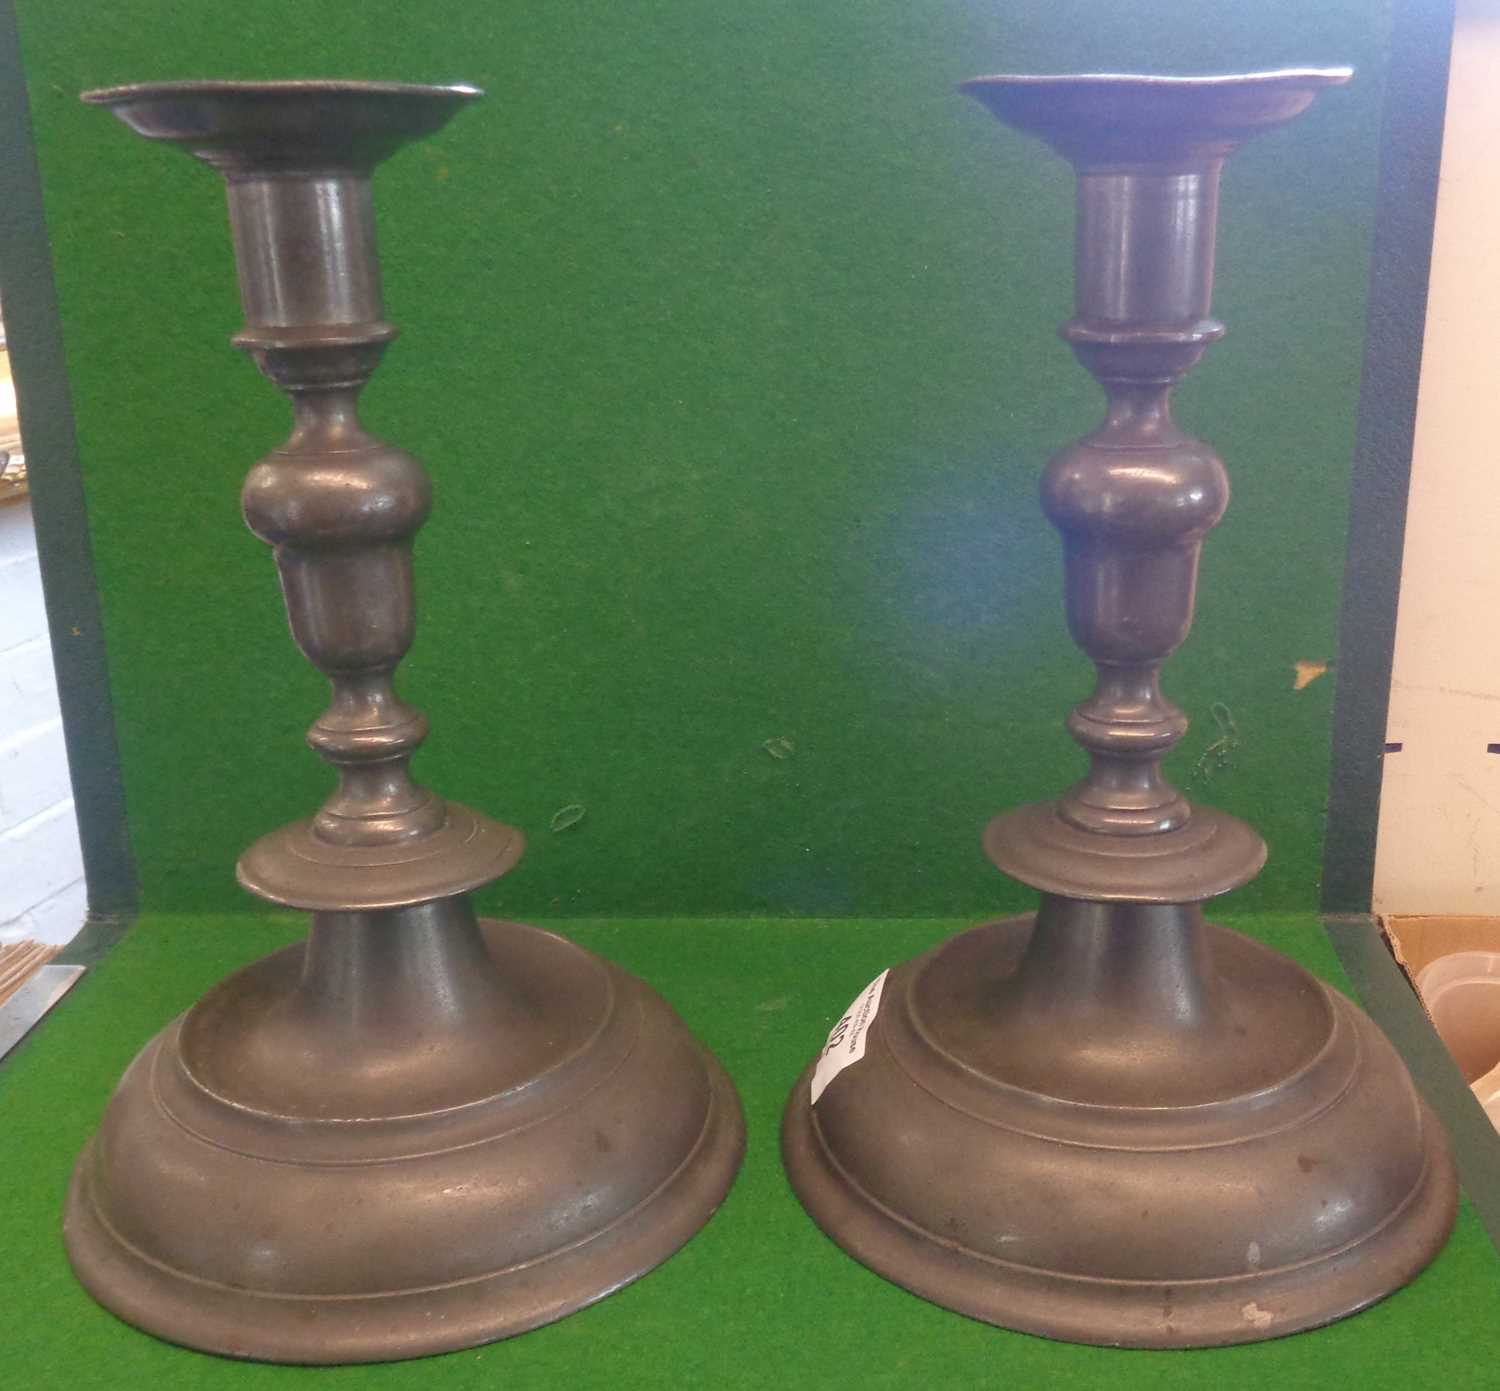 Pair of 18th c. pewter candlesticks with Bristol touchmarks, approx. 24cm high - Image 2 of 8